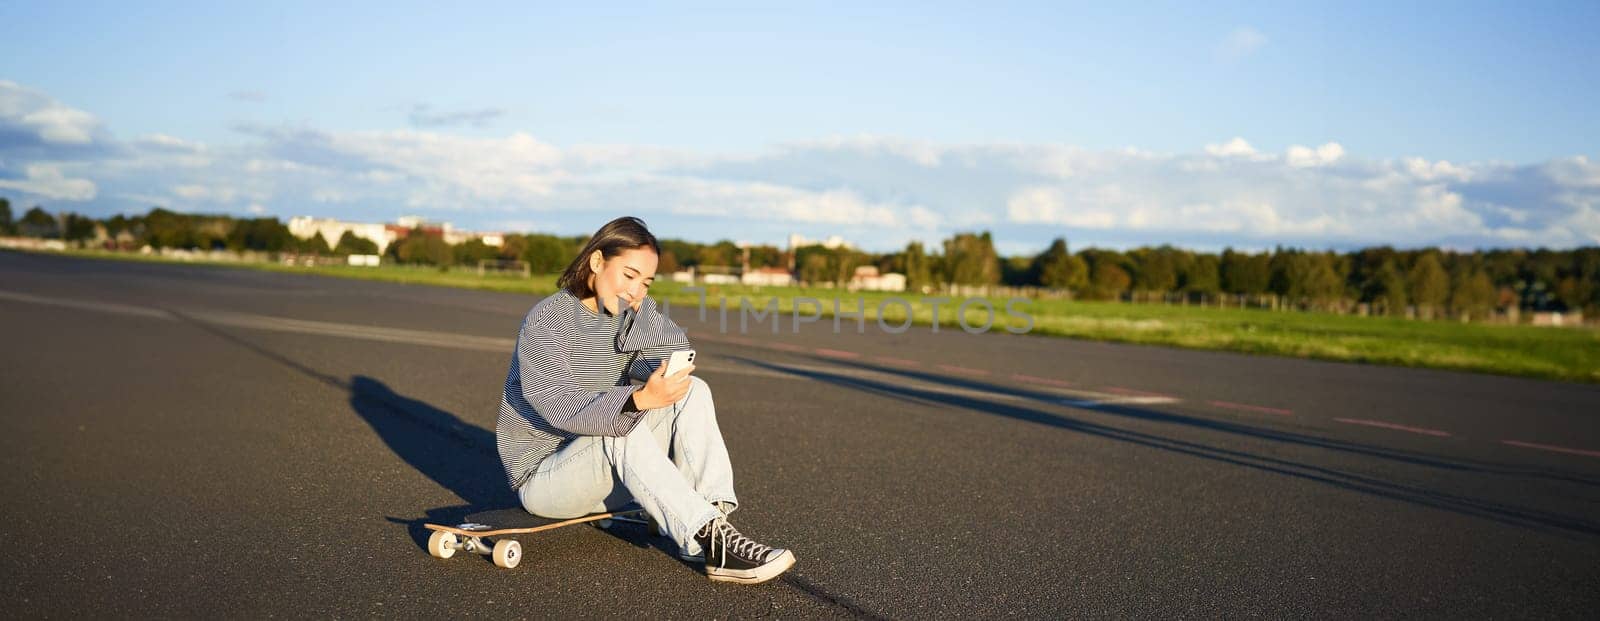 Portrait of young korean girl sitting on her skateboard on road, looking at smartphone, chatting on mobile app.